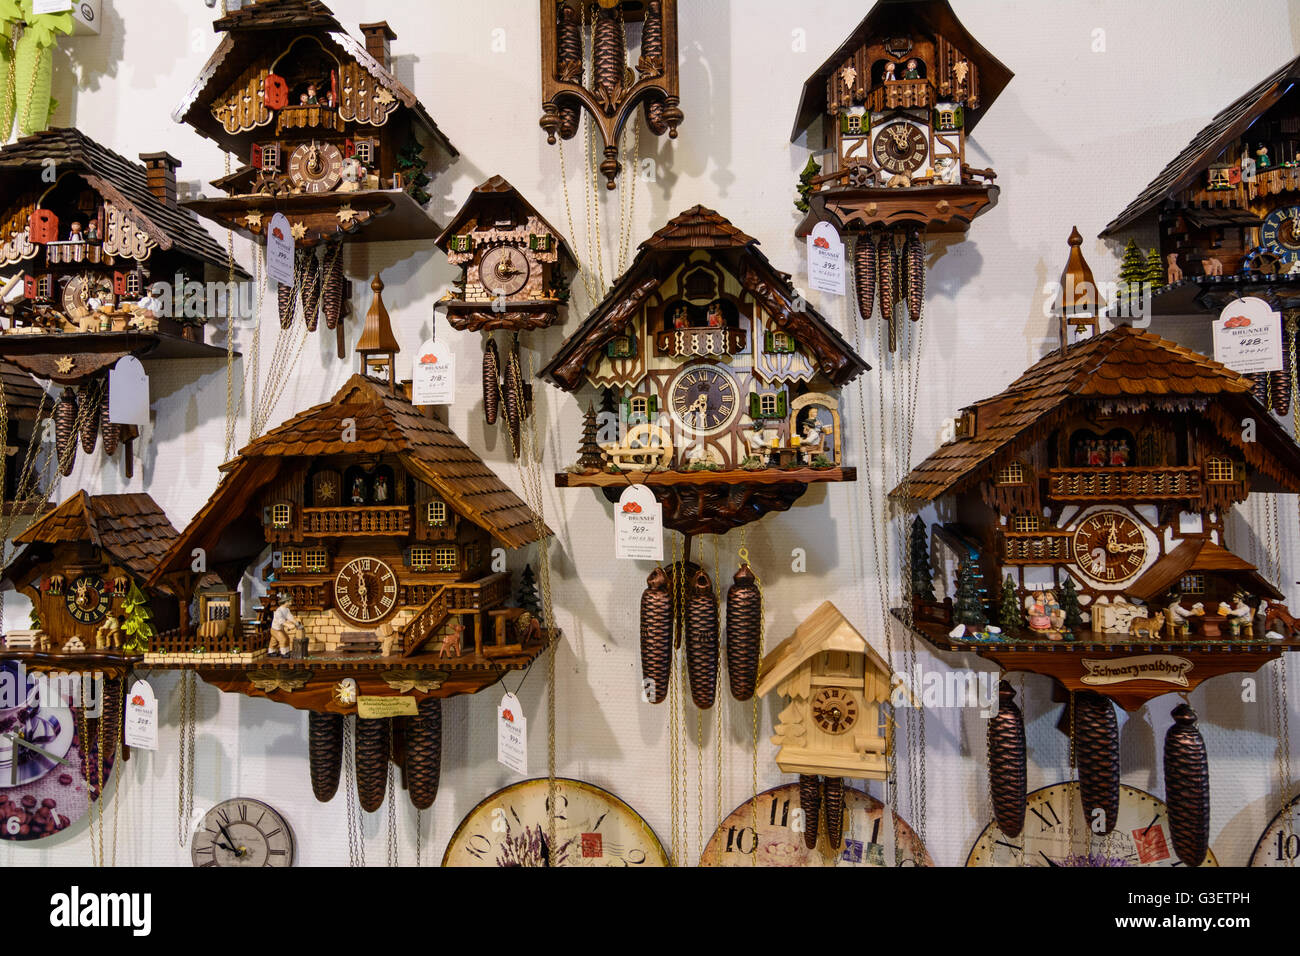 Cuckoo Clocks Black Forest Germany High Resolution Stock Photography And Images Alamy